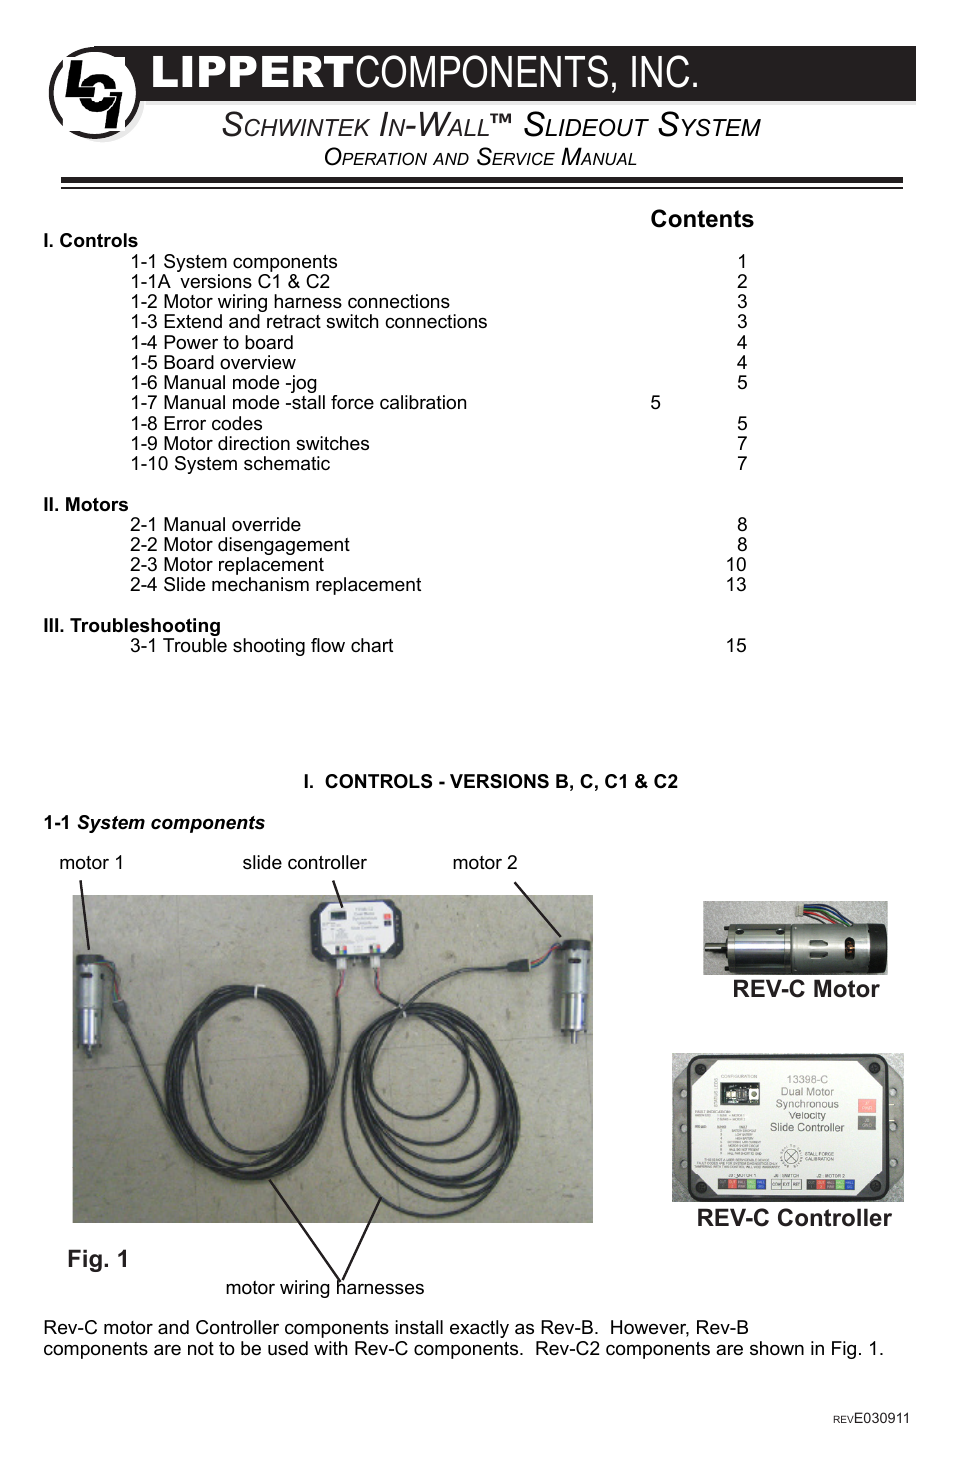 Lippert Components In Wall Slide-Out System User Manual | 16 pages